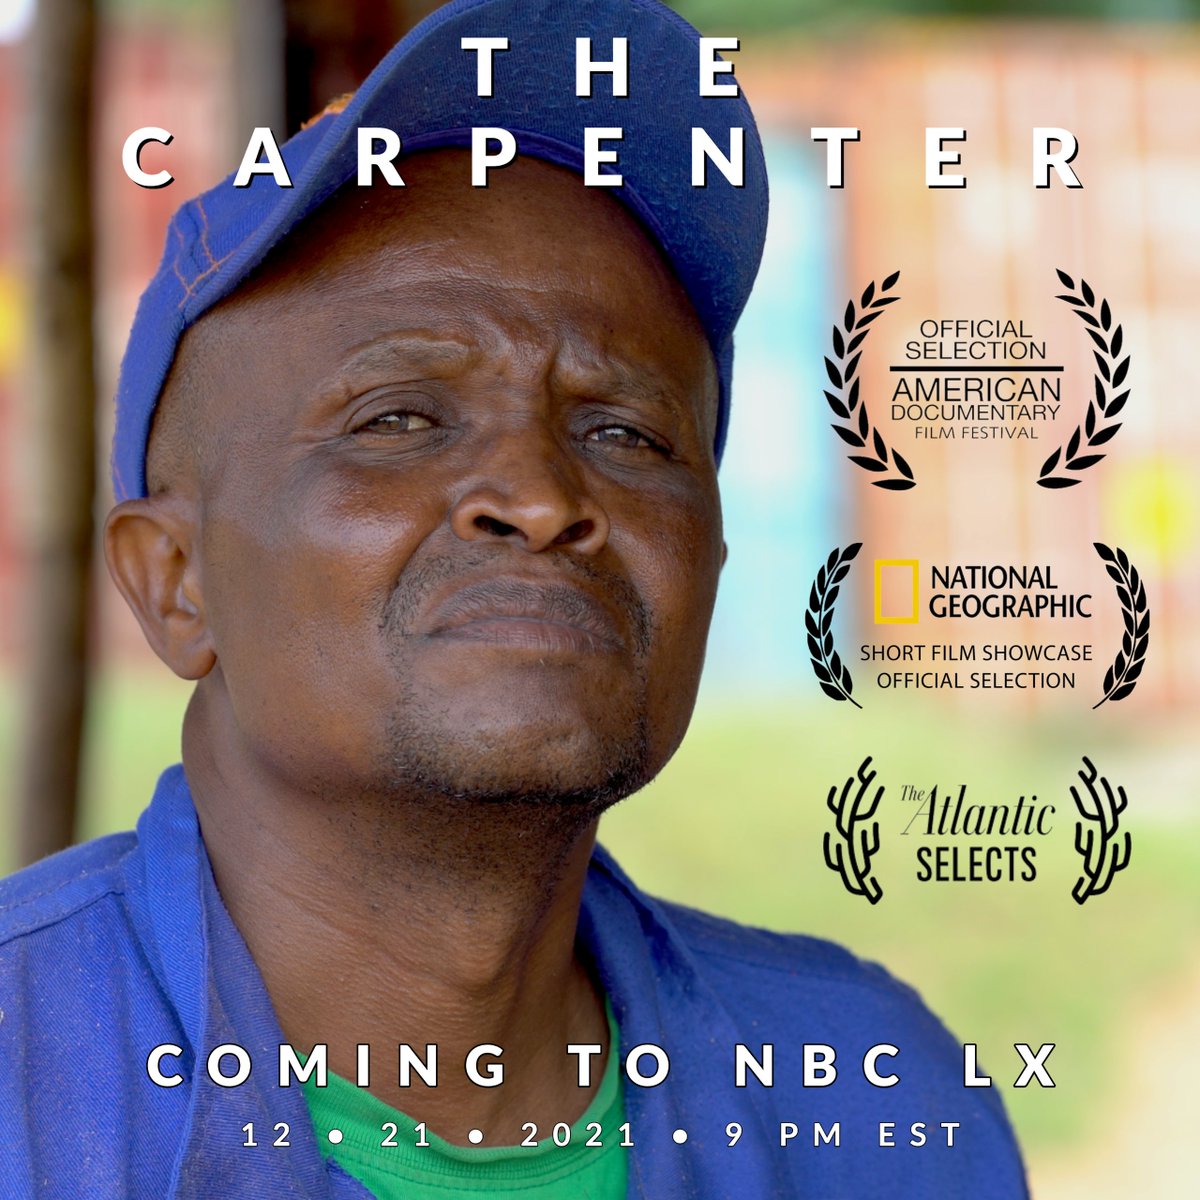 Excited to make my national television & streaming platform directorial debut tomorrow when my short documentary, The Carpenter, airs on NBC LX & Peacock! The Carpenter is about David Miti, a carpenter  in Zambia who hand makes devices for kids w/ disabilities. Catch it tomorrow! https://t.co/ReqOG4jVJM